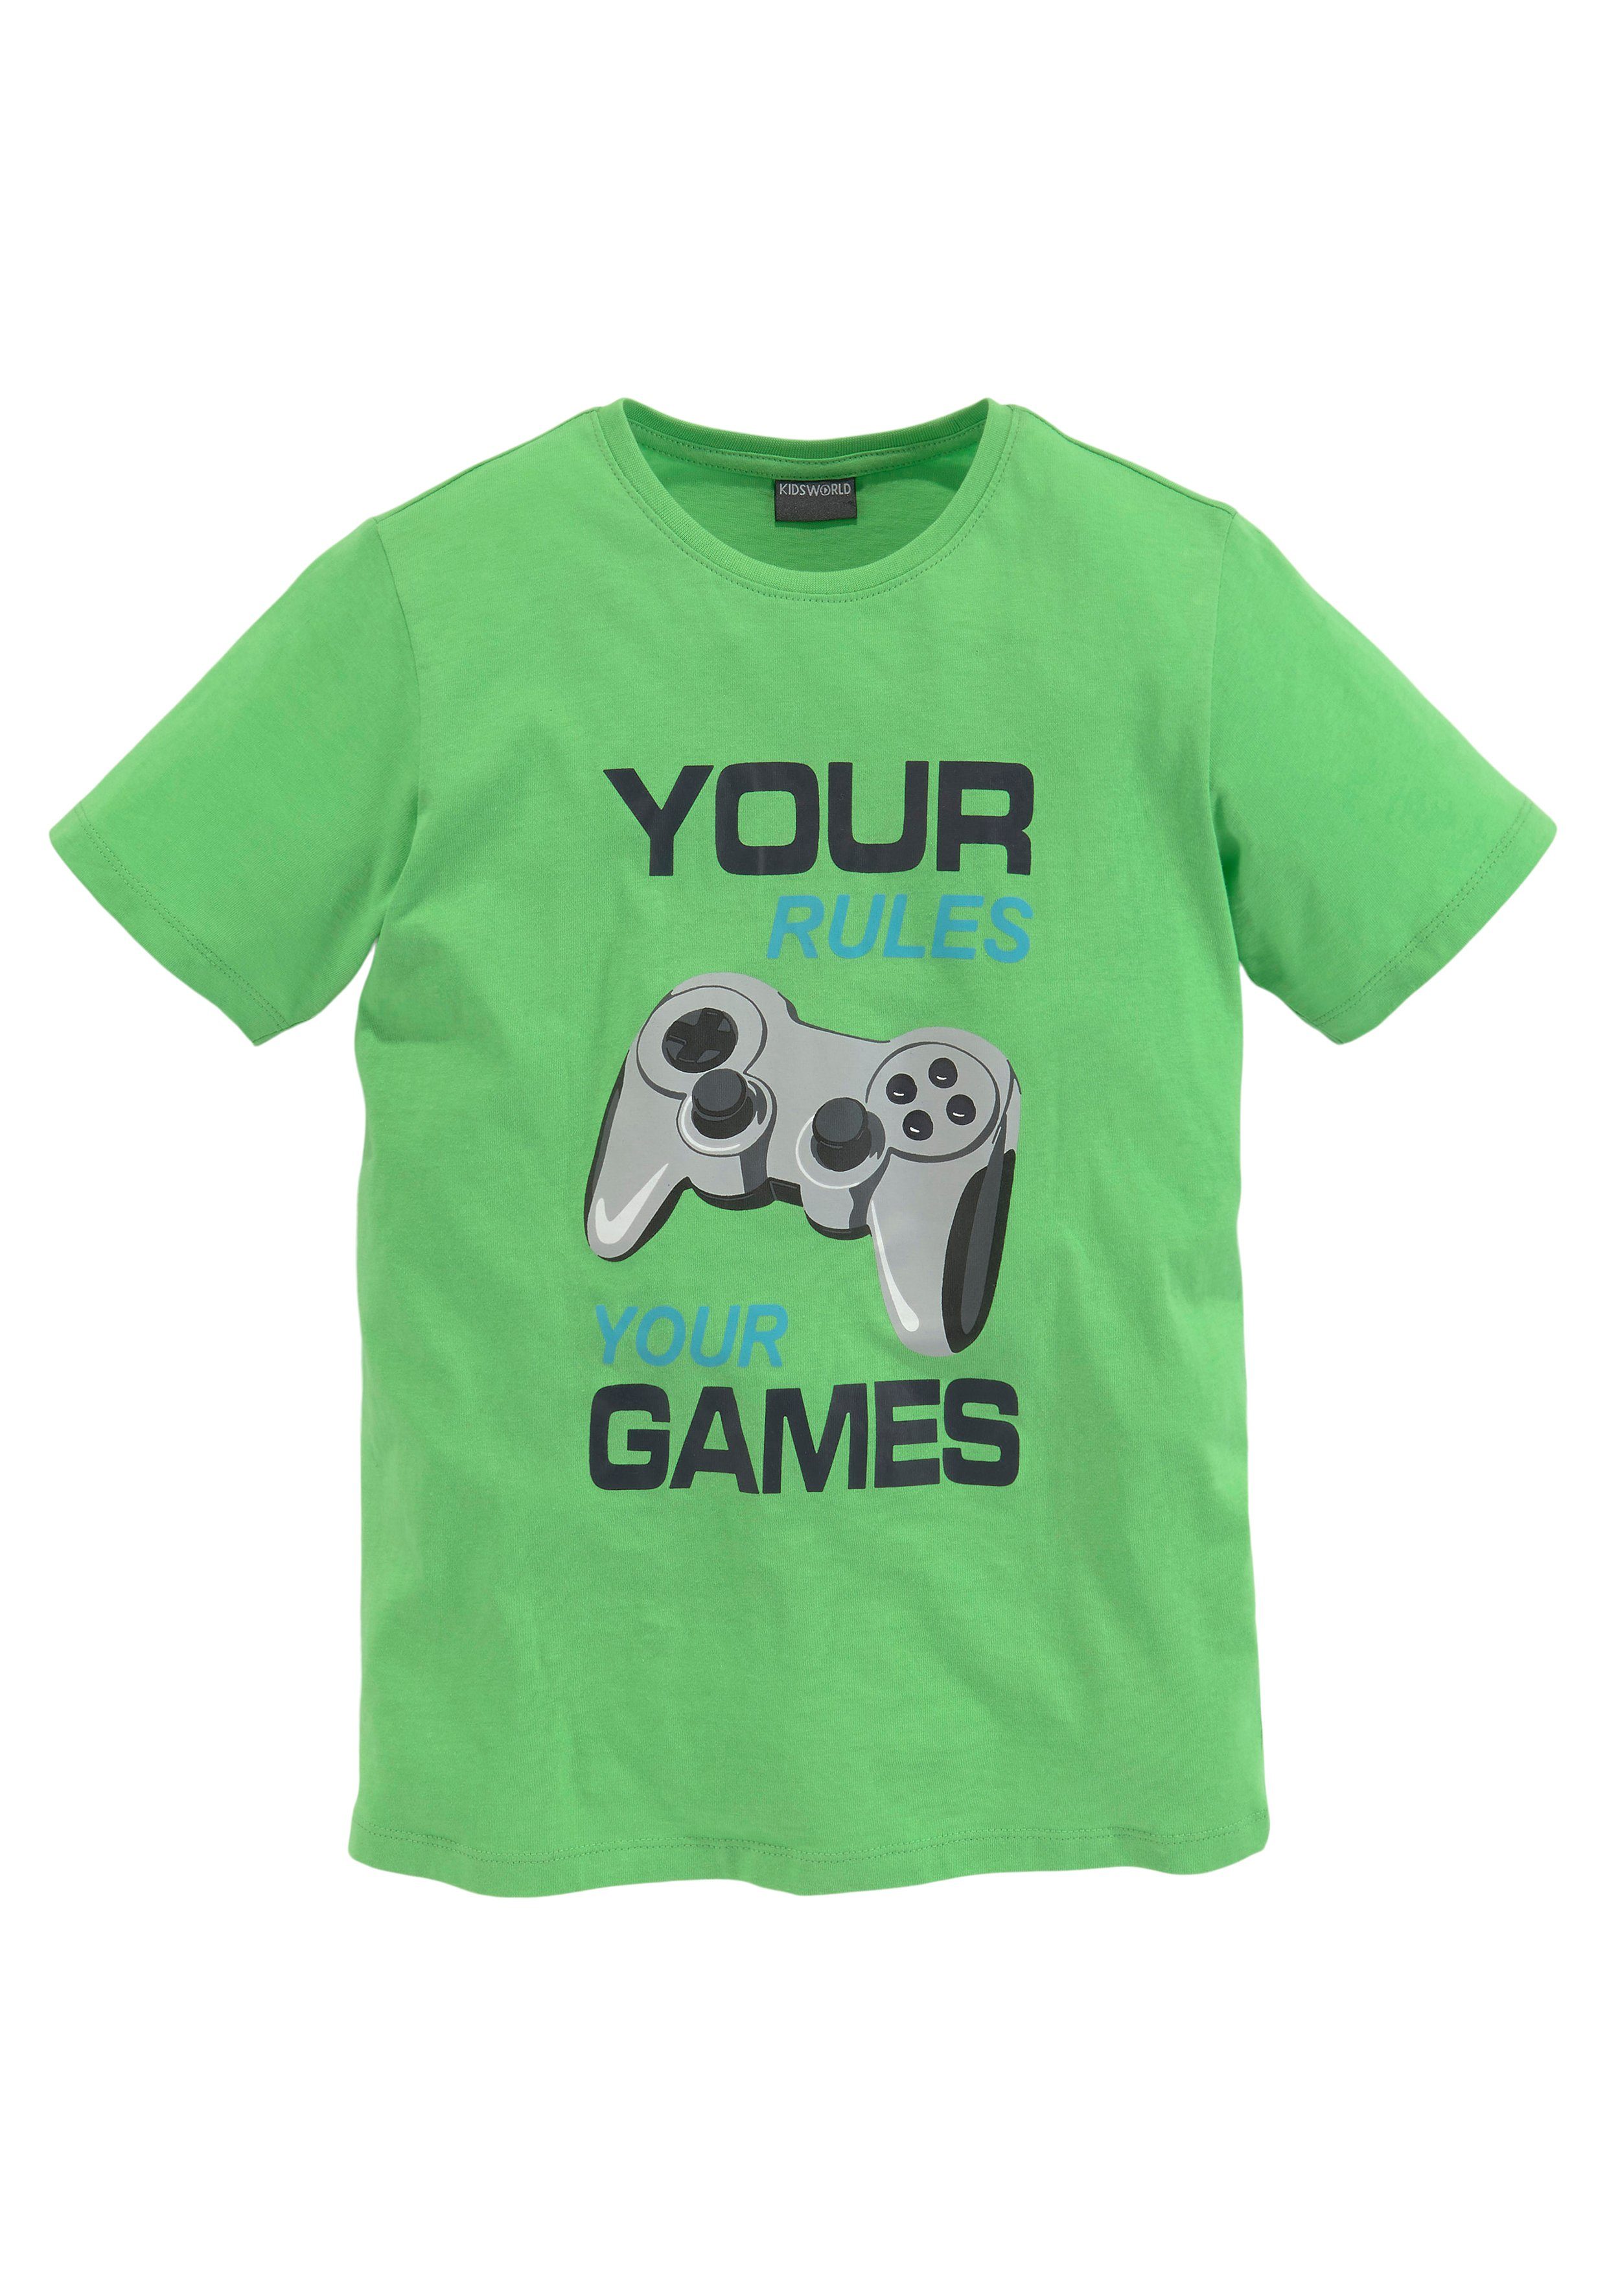 RULES KIDSWORLD T-Shirt GAMES YOUR YOUR